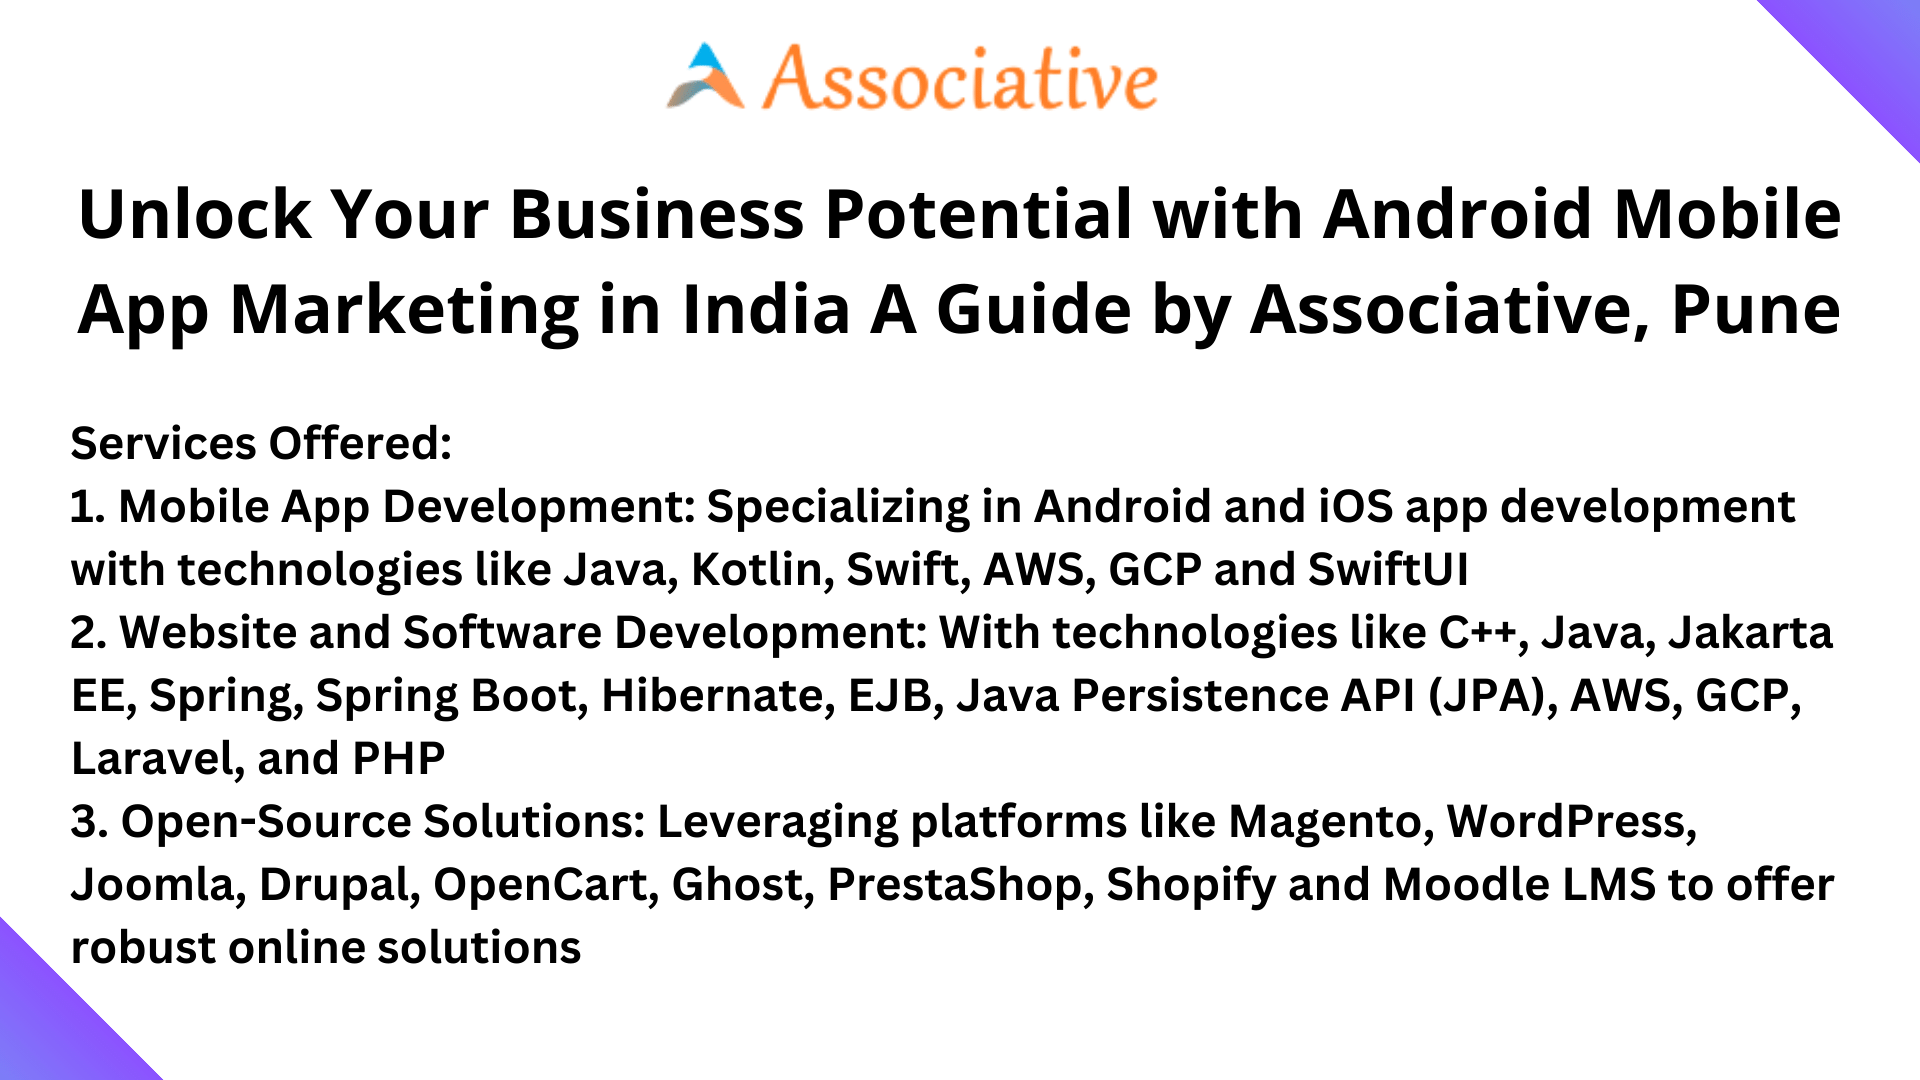 Unlock Your Business Potential with Android Mobile App Marketing in India A Guide by Associative, Pune